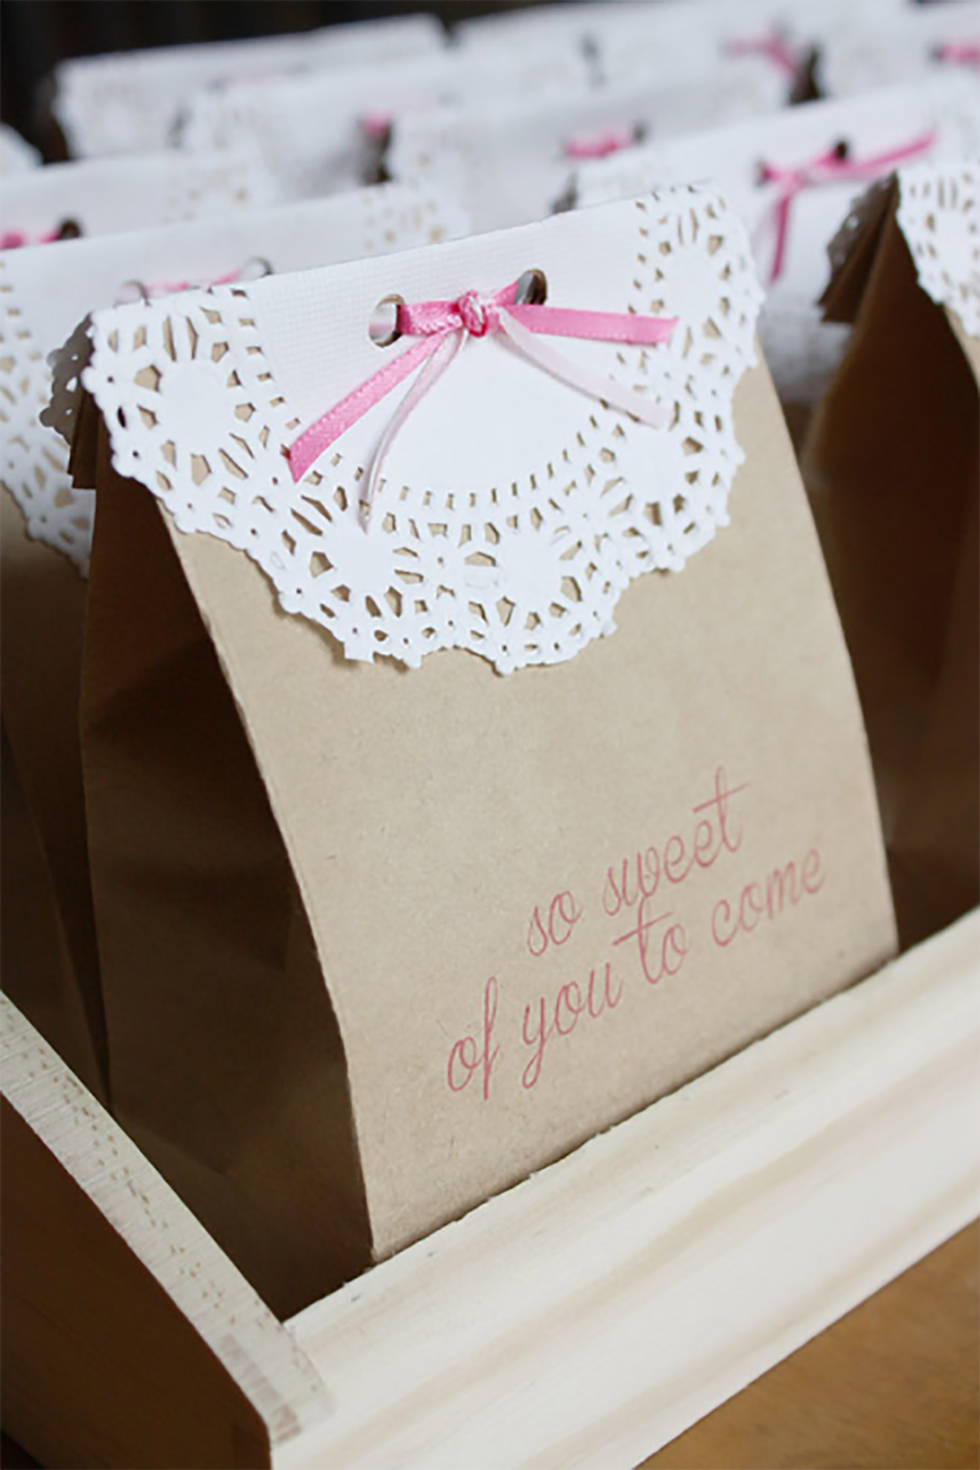 Bridal Shower Favors Your Guests Will Love